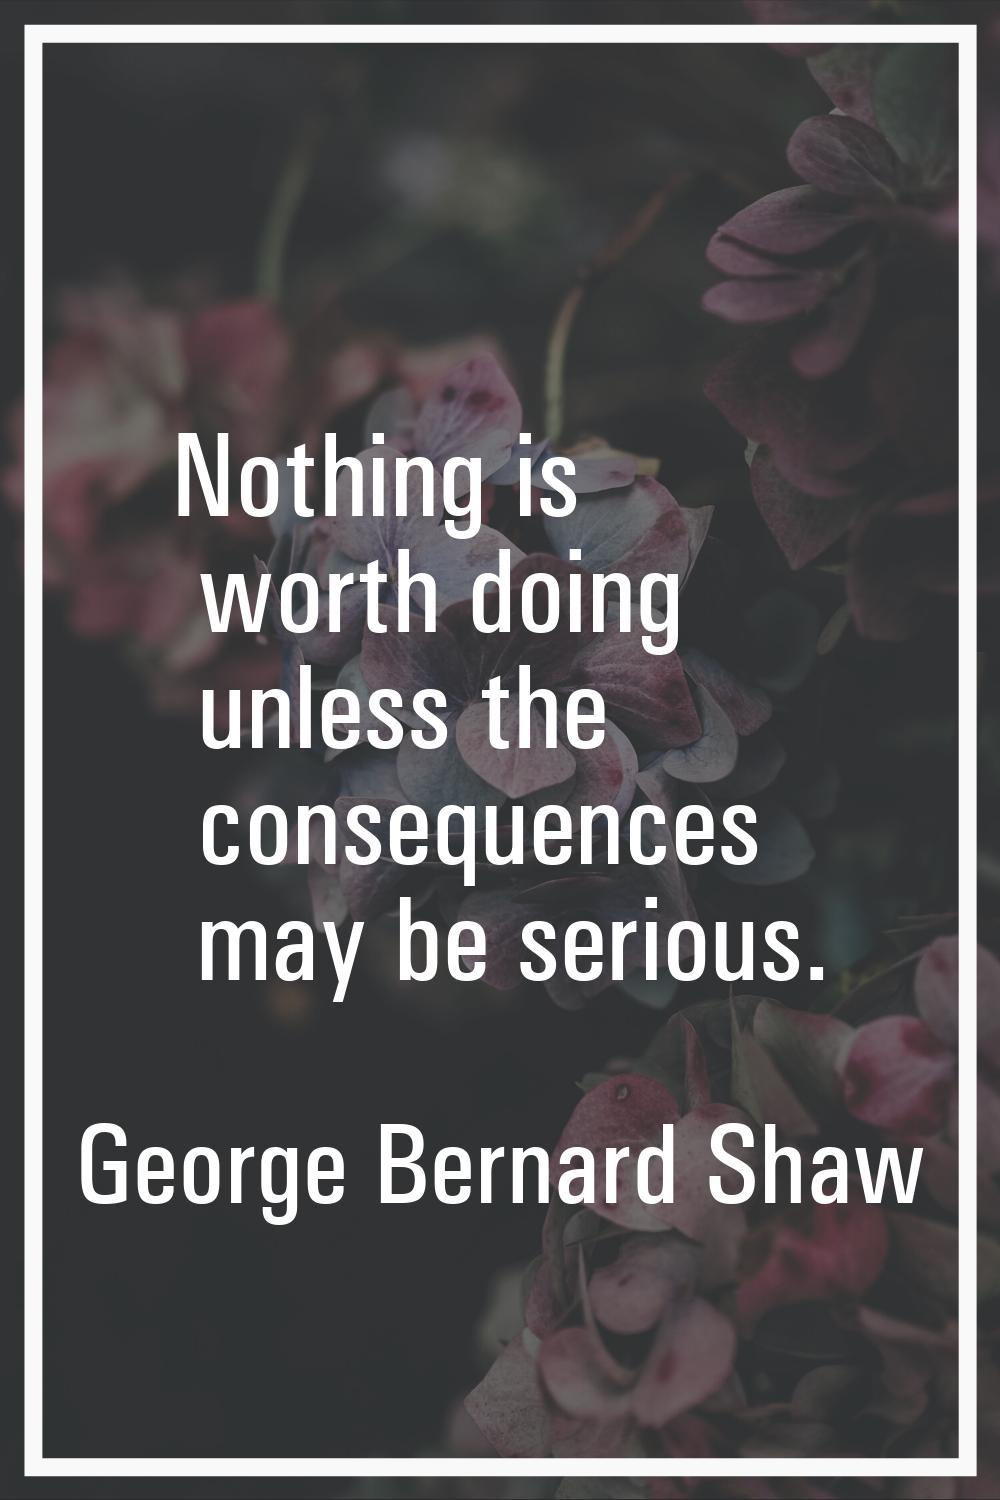 Nothing is worth doing unless the consequences may be serious.